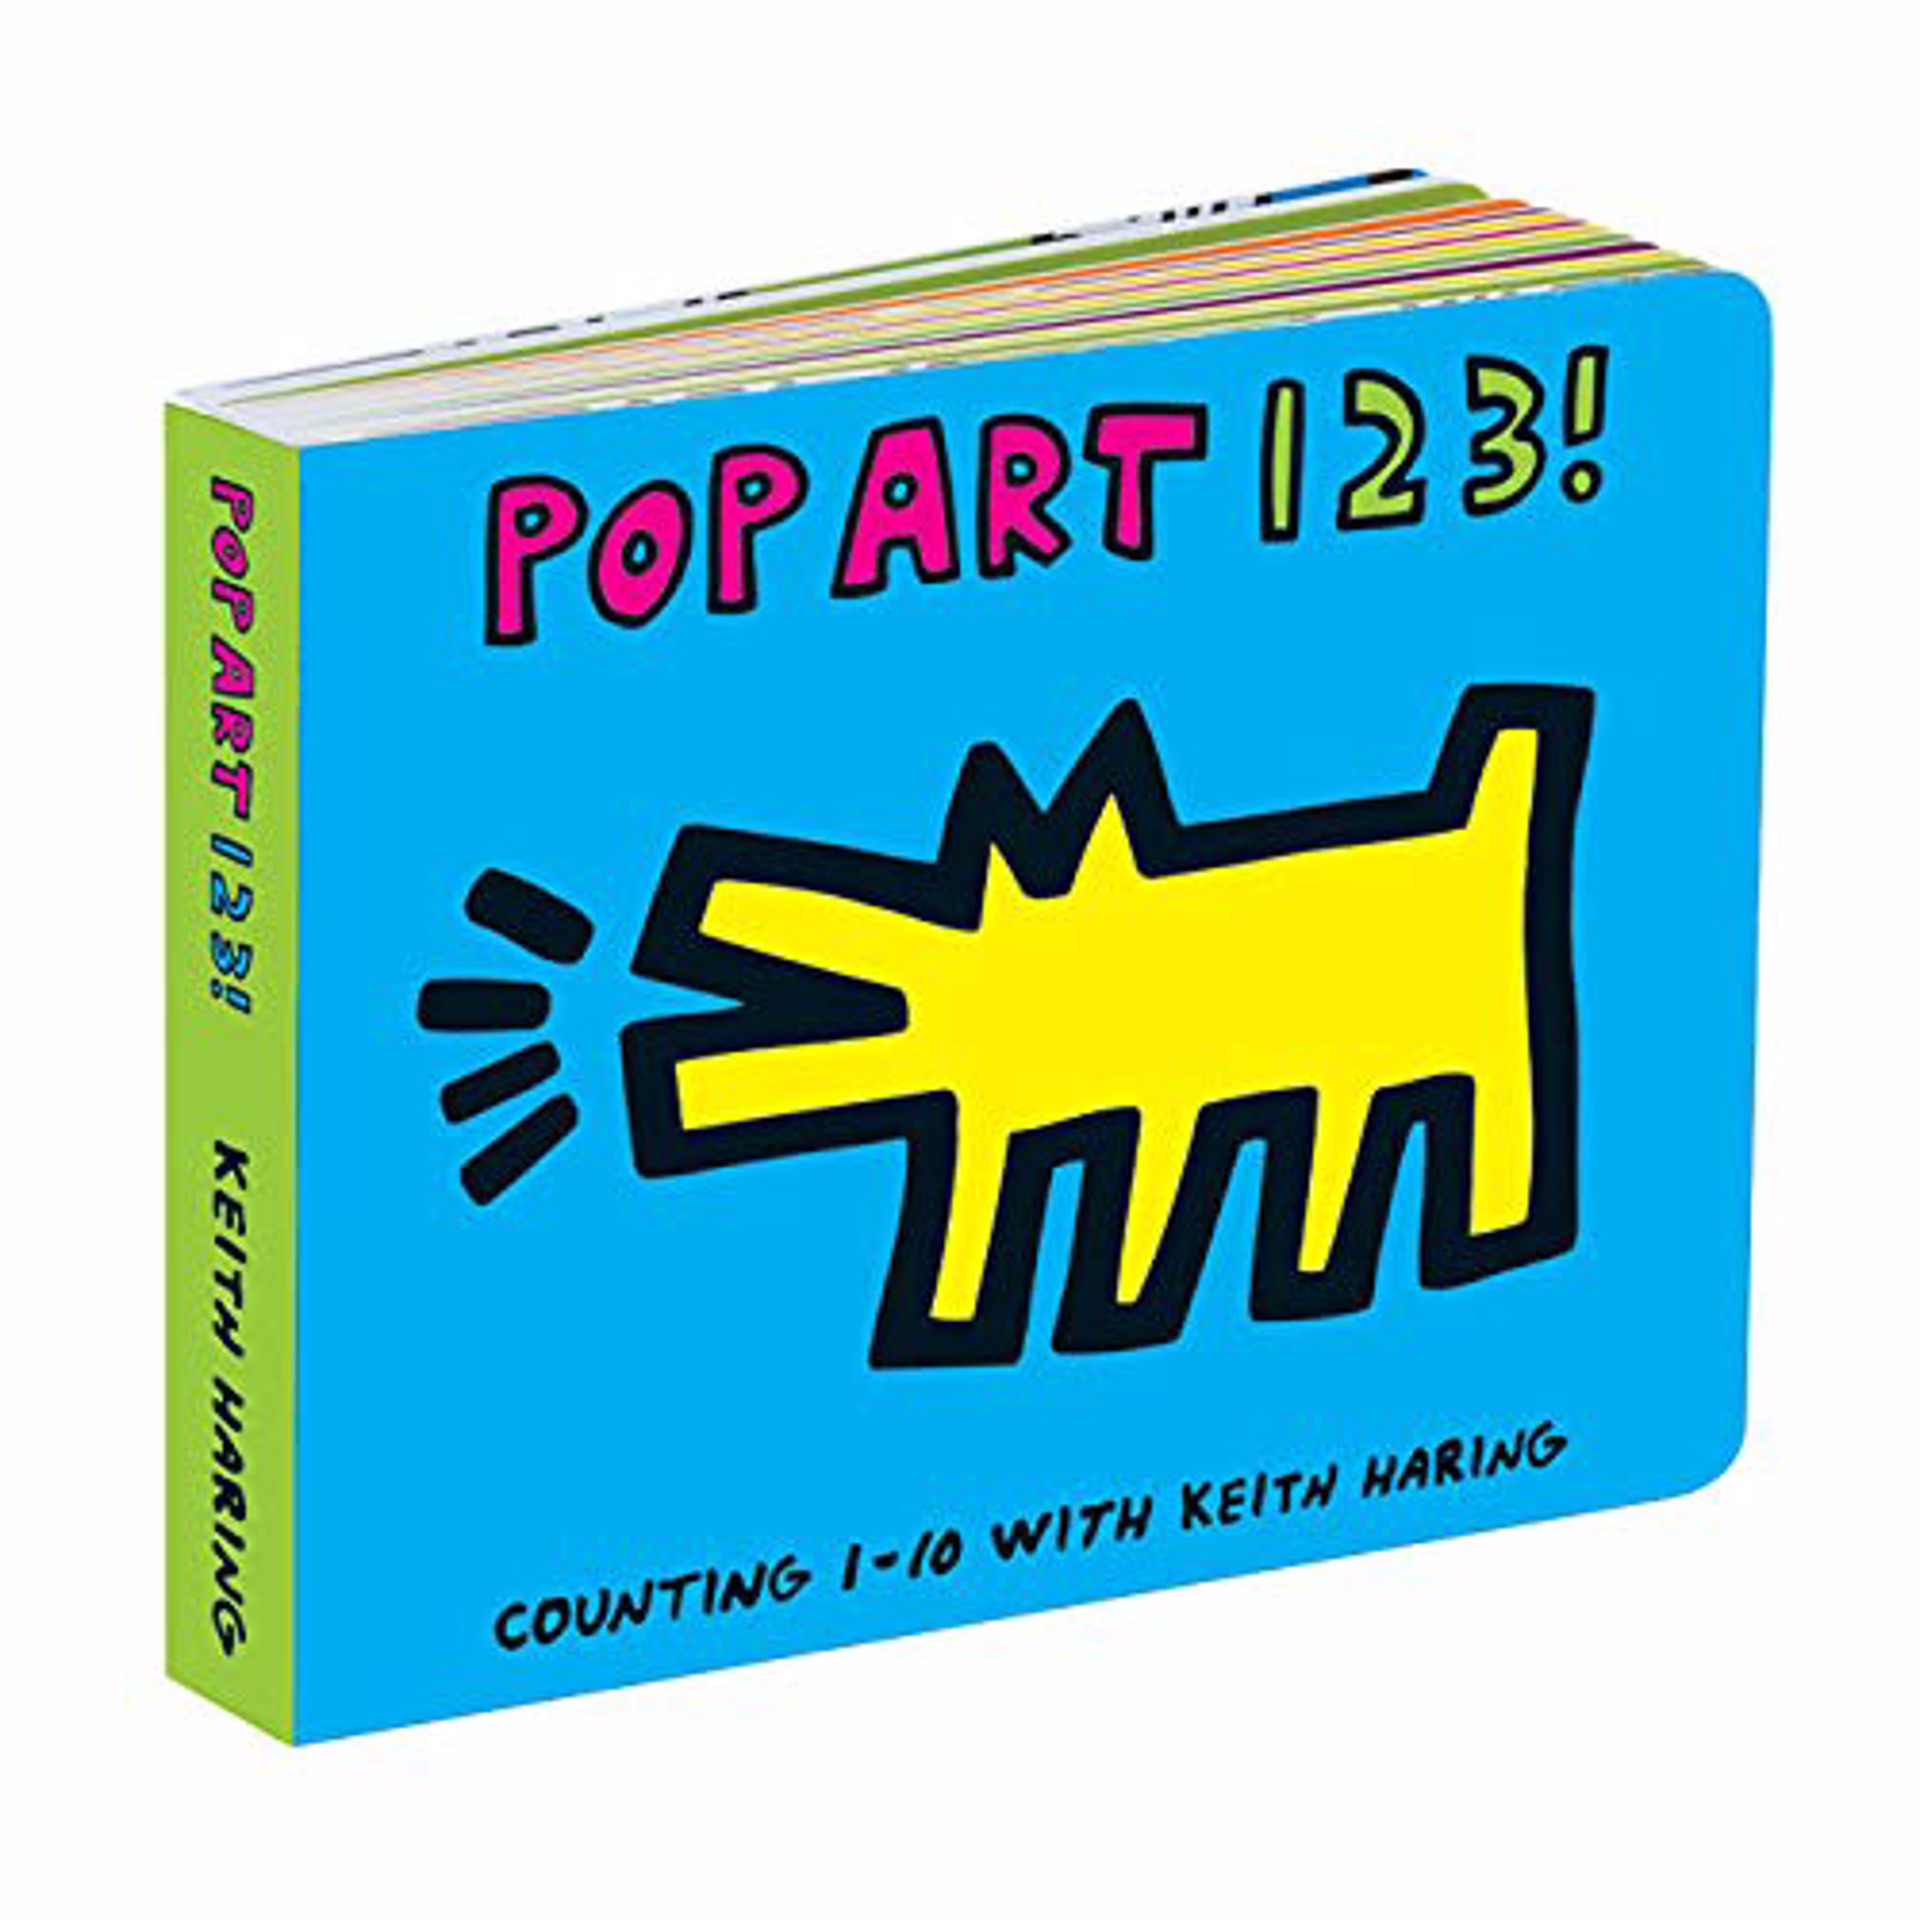 Pop Art 123! by Keith Haring